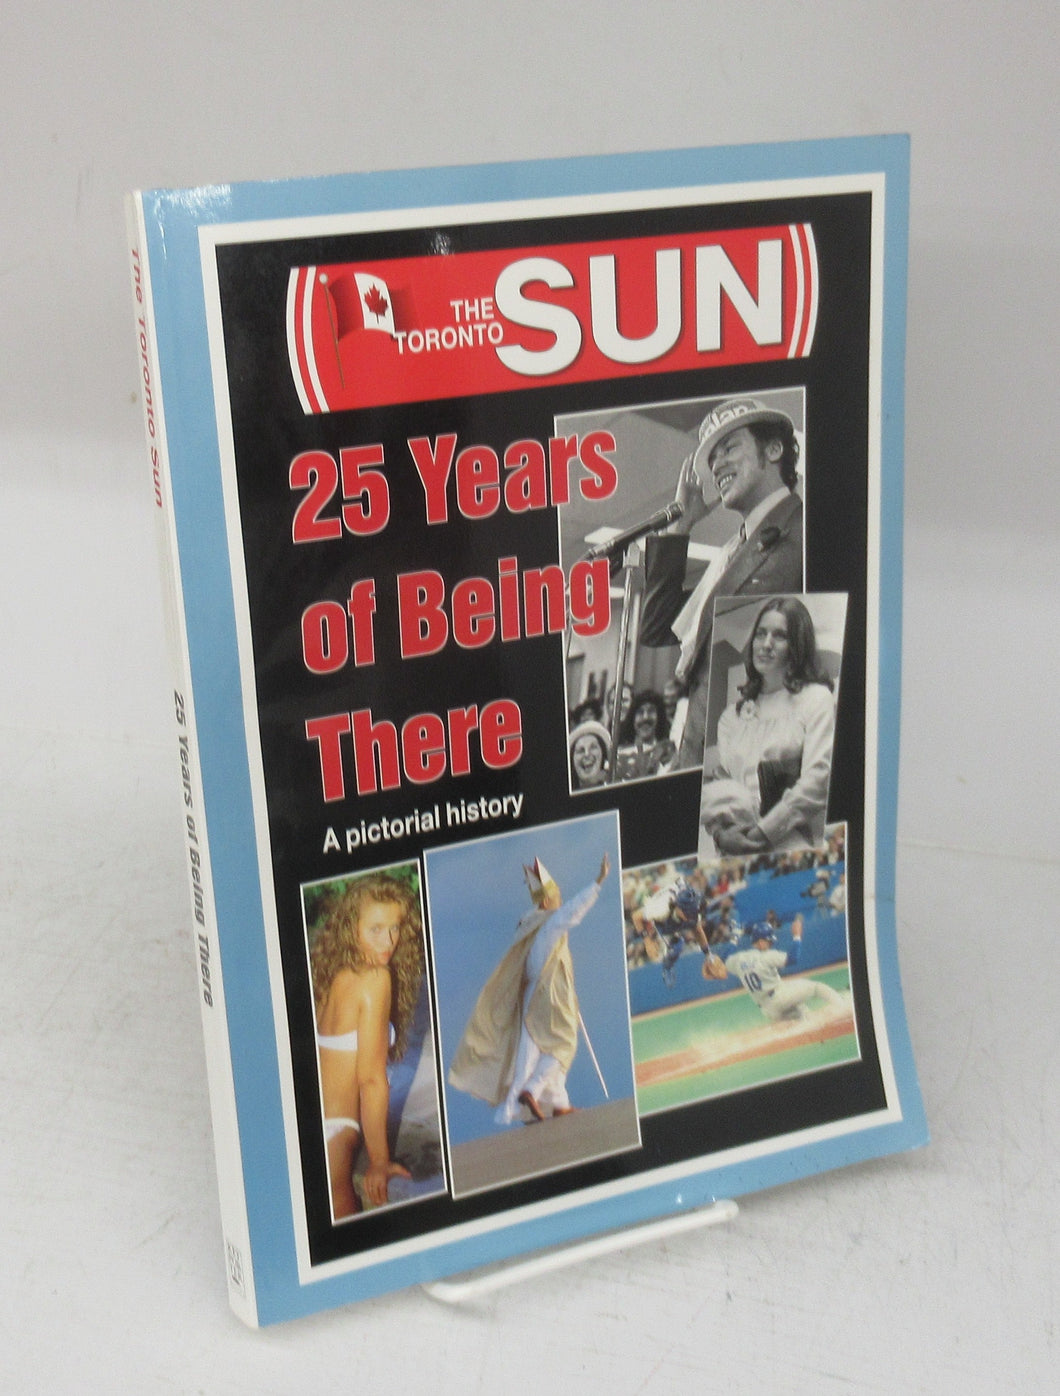 The Toronto Sun: 25 Years of Being There. 1971-1996. A pictorial history